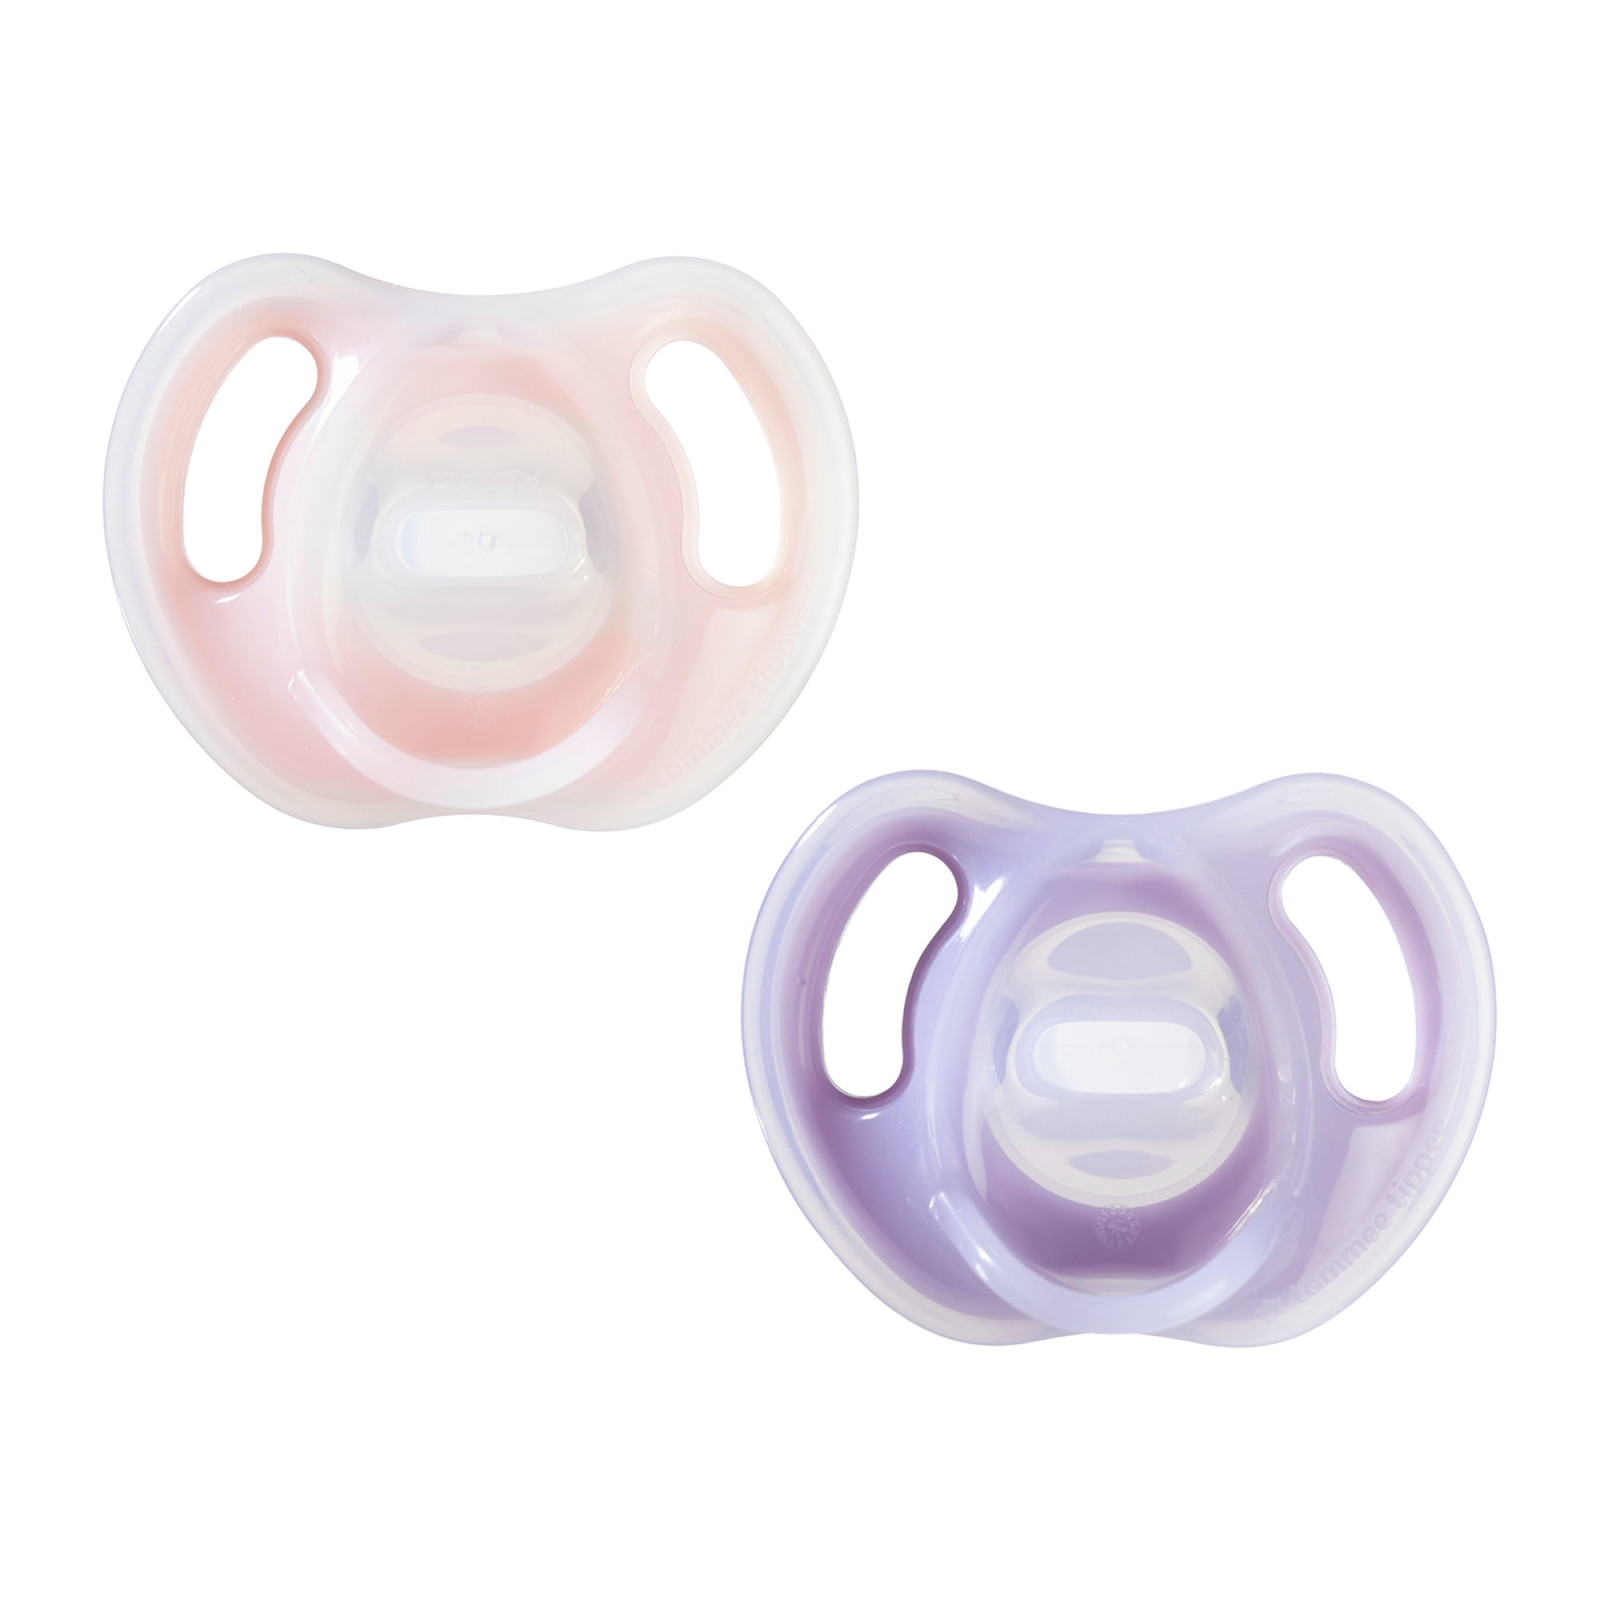 Tommee Tippee Ultra-Light Silicone Pacifier, 6-18 months, Symmetrical One-Piece Design, BPA-Free Silicone Binkies, Includes Sterilizer Box, 2 Pack - image 1 of 8